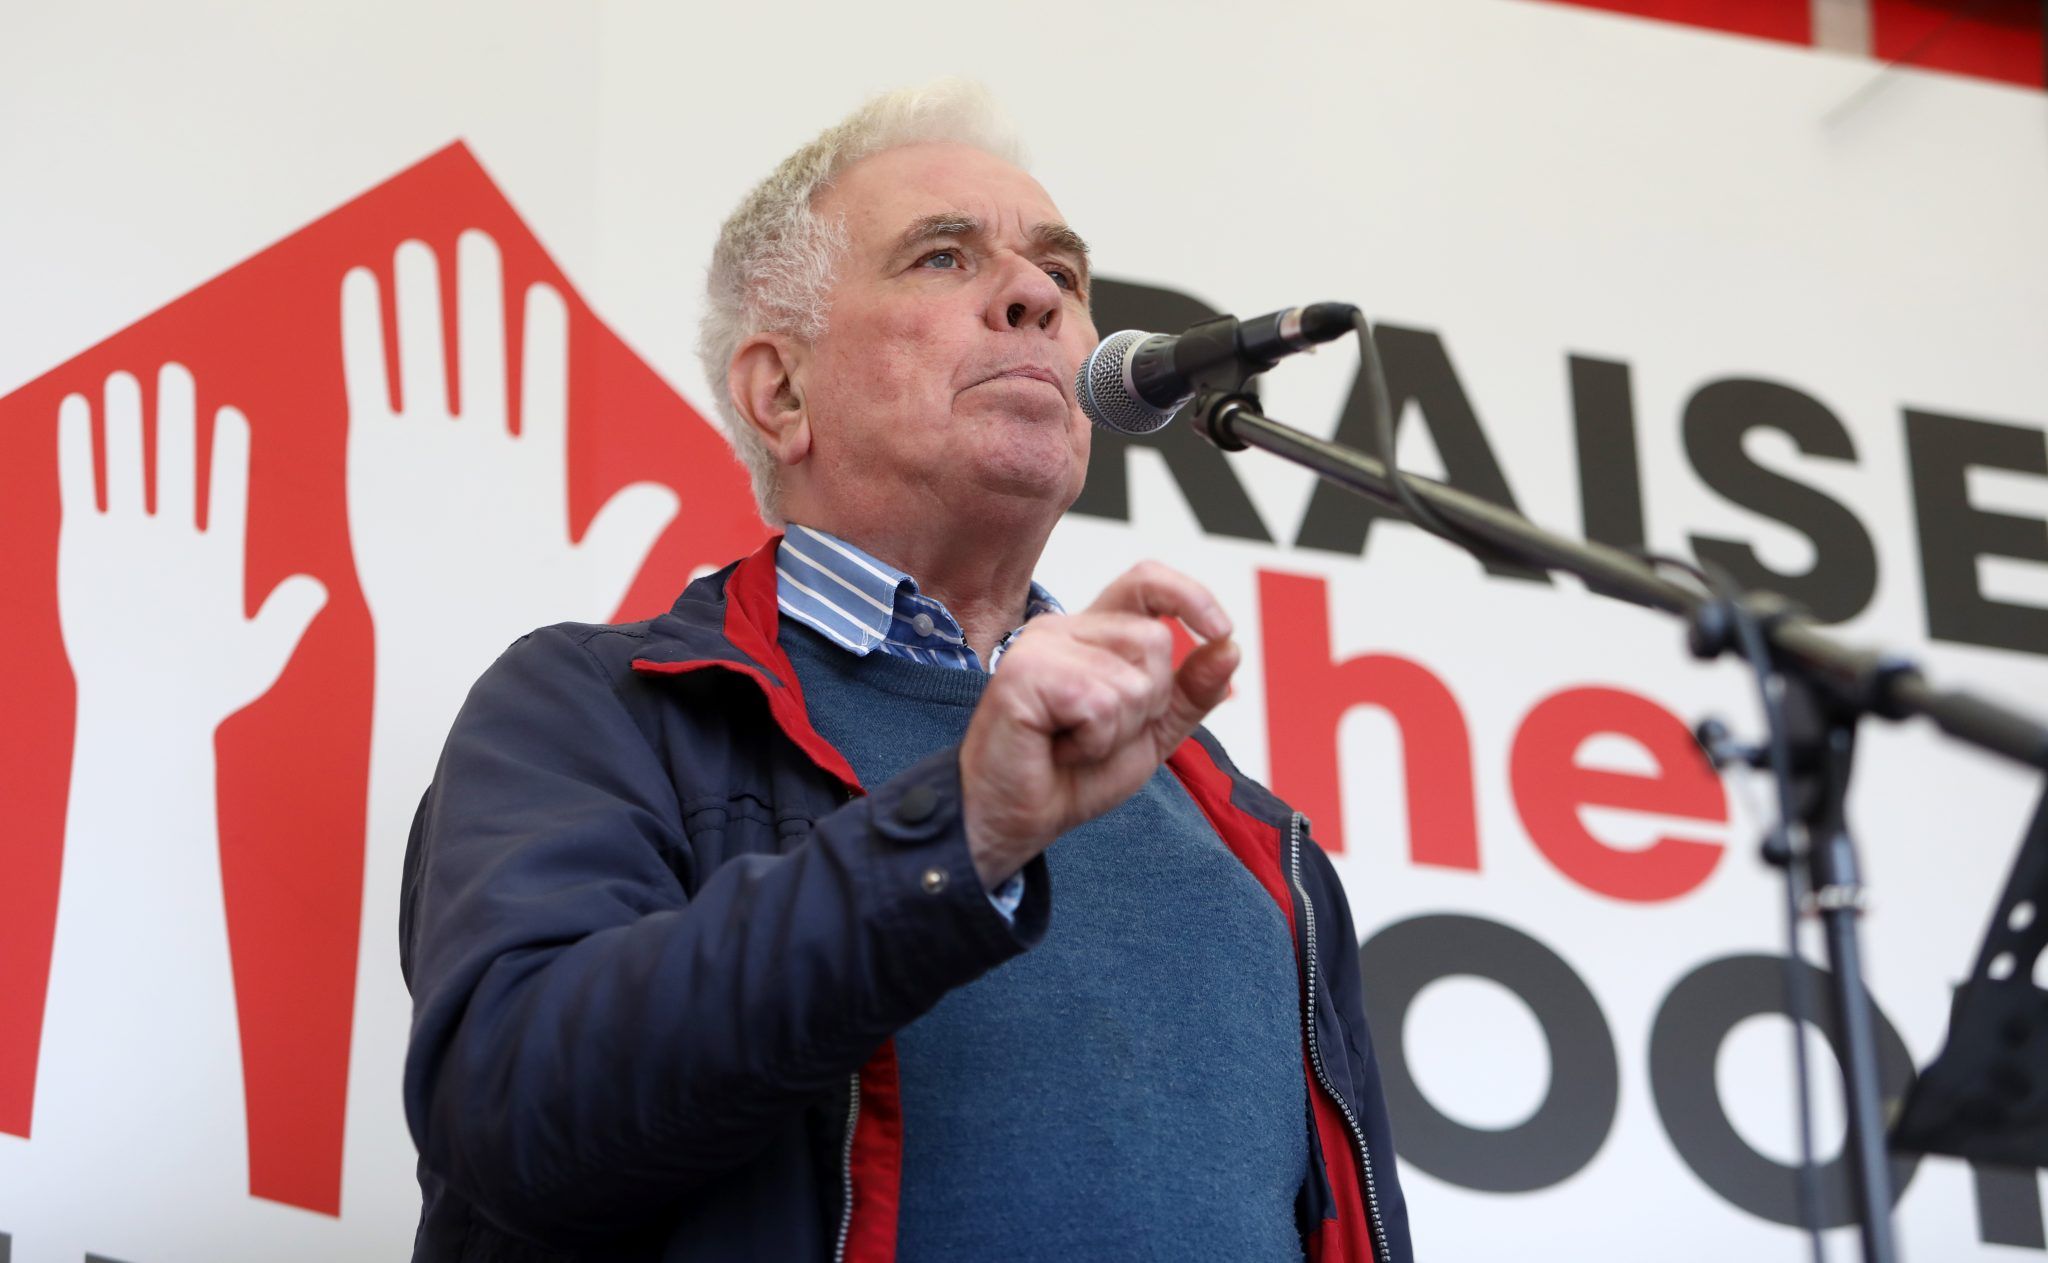 Peter McVerry Eviction ban